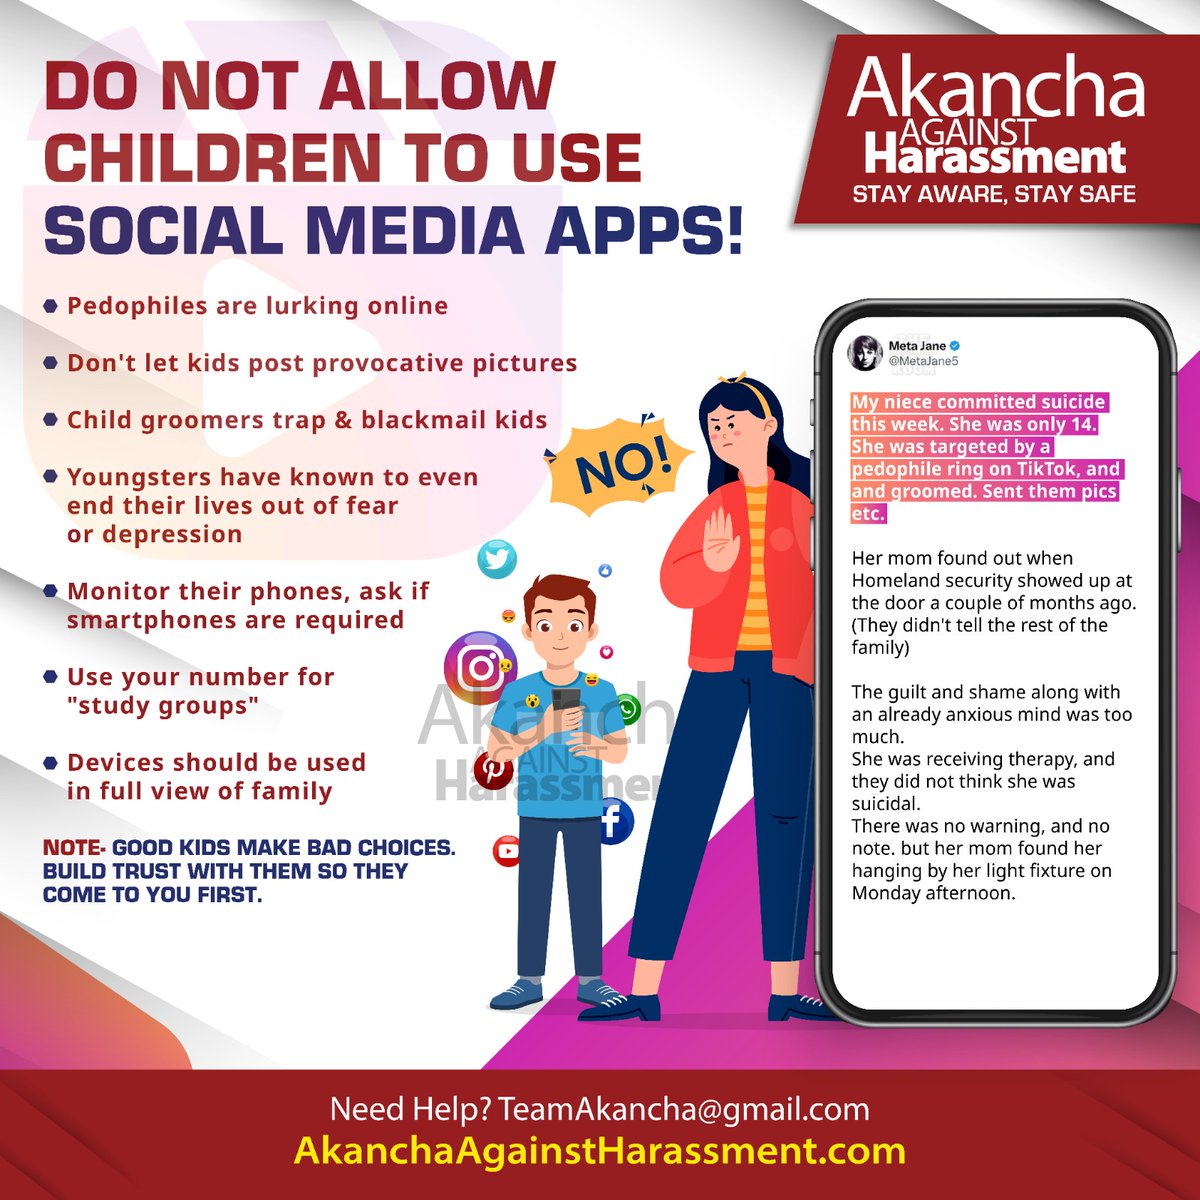 Please read carefully ⚠️
DO NOT ALLOW CHILDREN TO USE SOCIAL MEDIA APPS!
No, you can't outsmart criminals & good children also make mistakes.
#AAH #CyberSafety #India